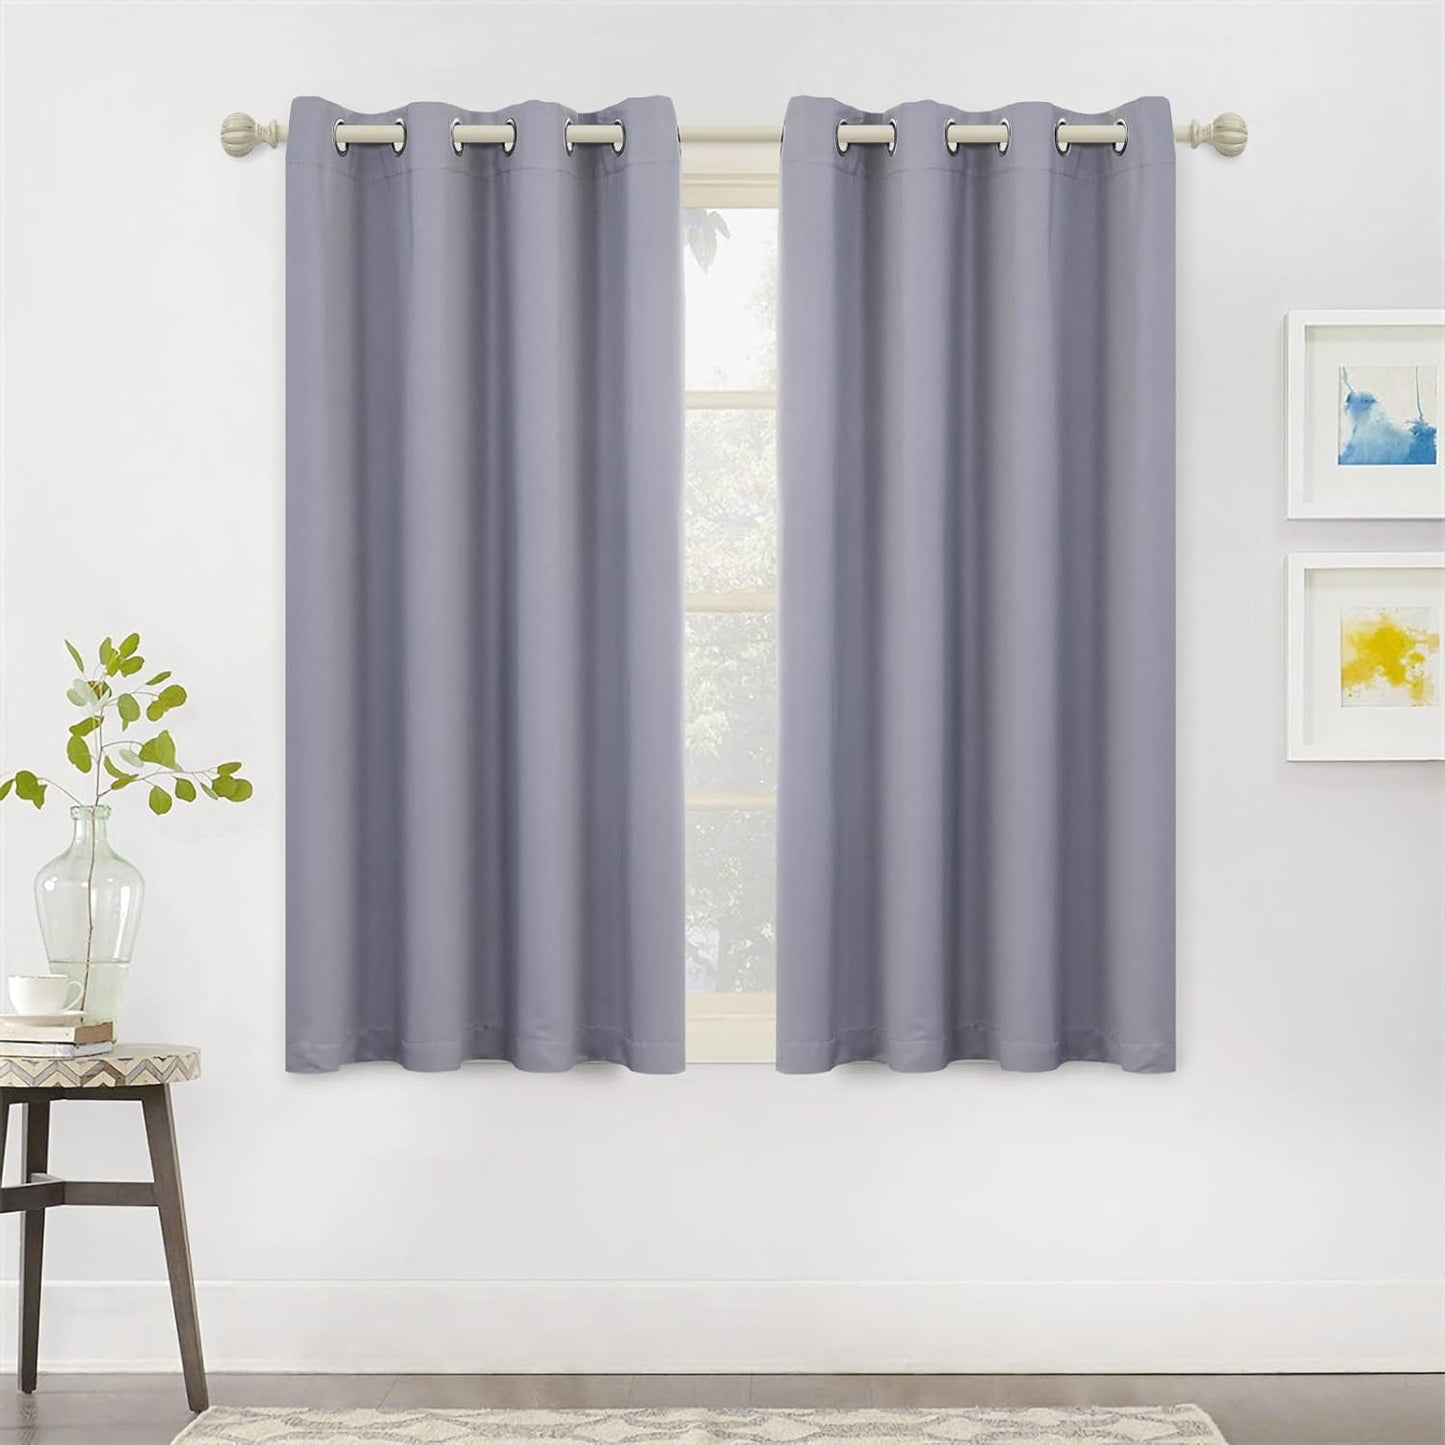 MYSKY HOME Black Curtains for Bedroom 90 Inch Long Blackout Curtains for Living Room 2 Panels Thermal Insulated Grommet Room Darkening Curtains Privacy Protect Window Drapes, 52 X 90 Inches, Black  MYSKY HOME Grey 52W X 63L 